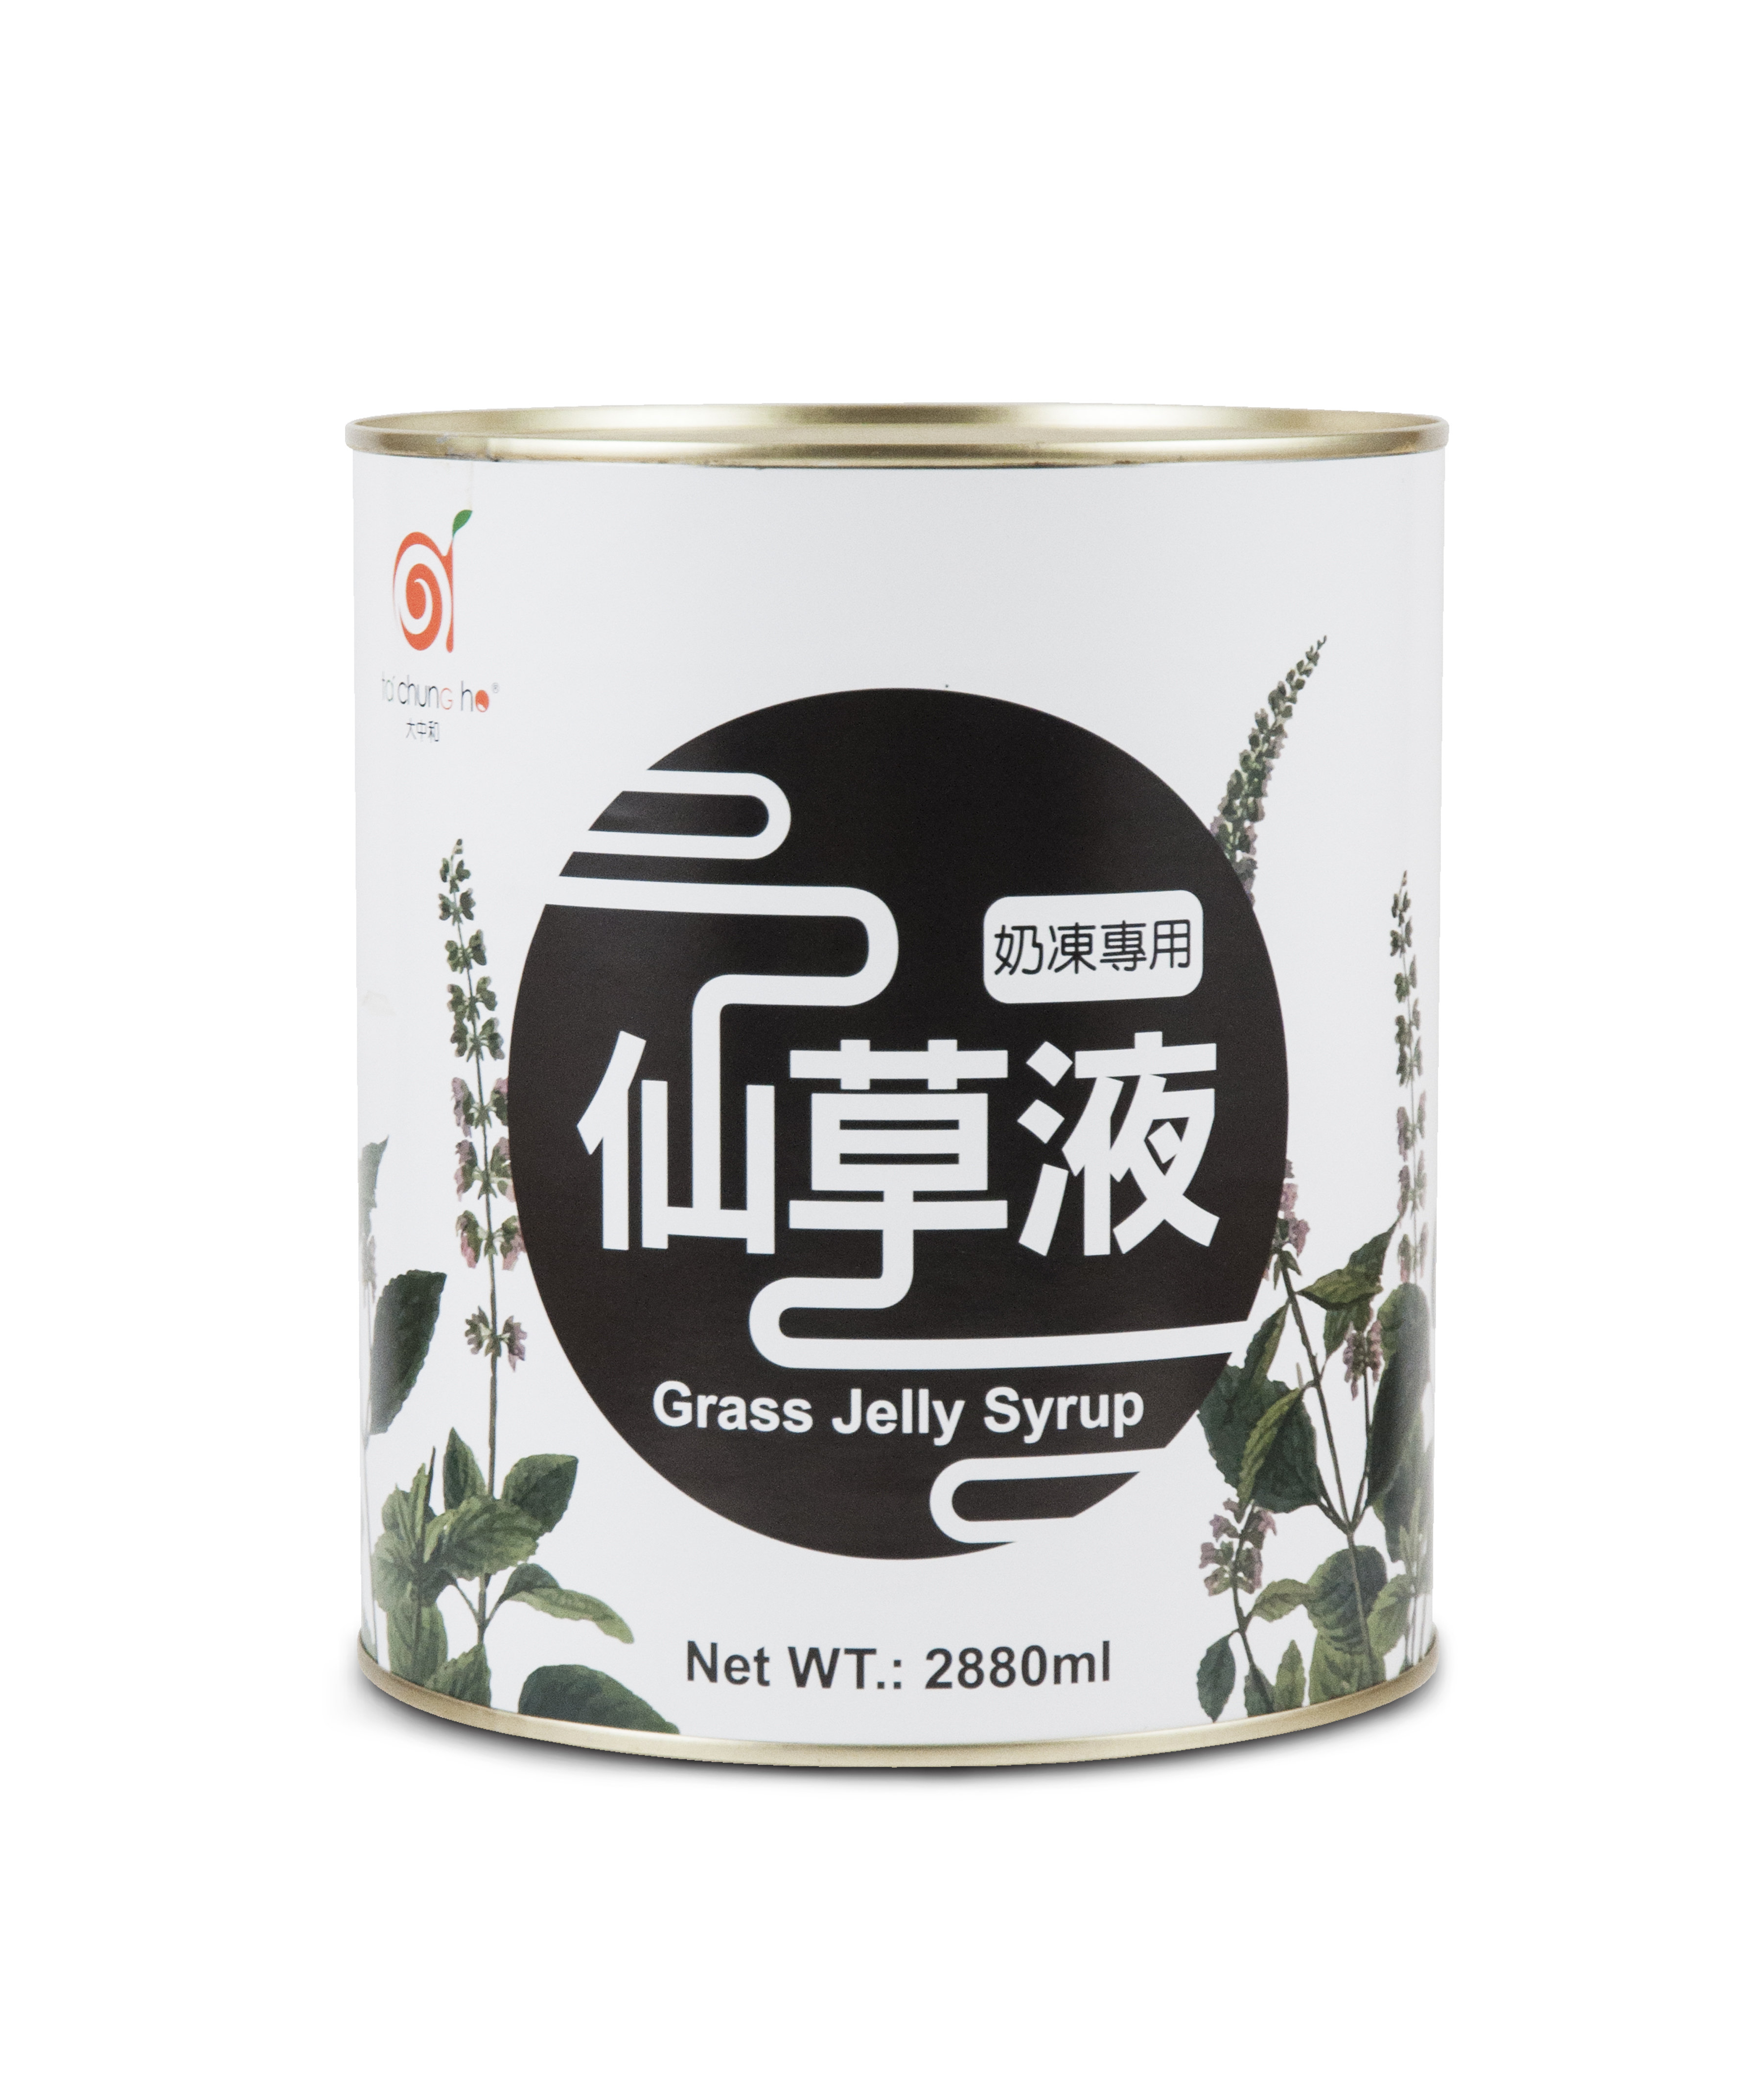 Grass Jelly Syrup Package